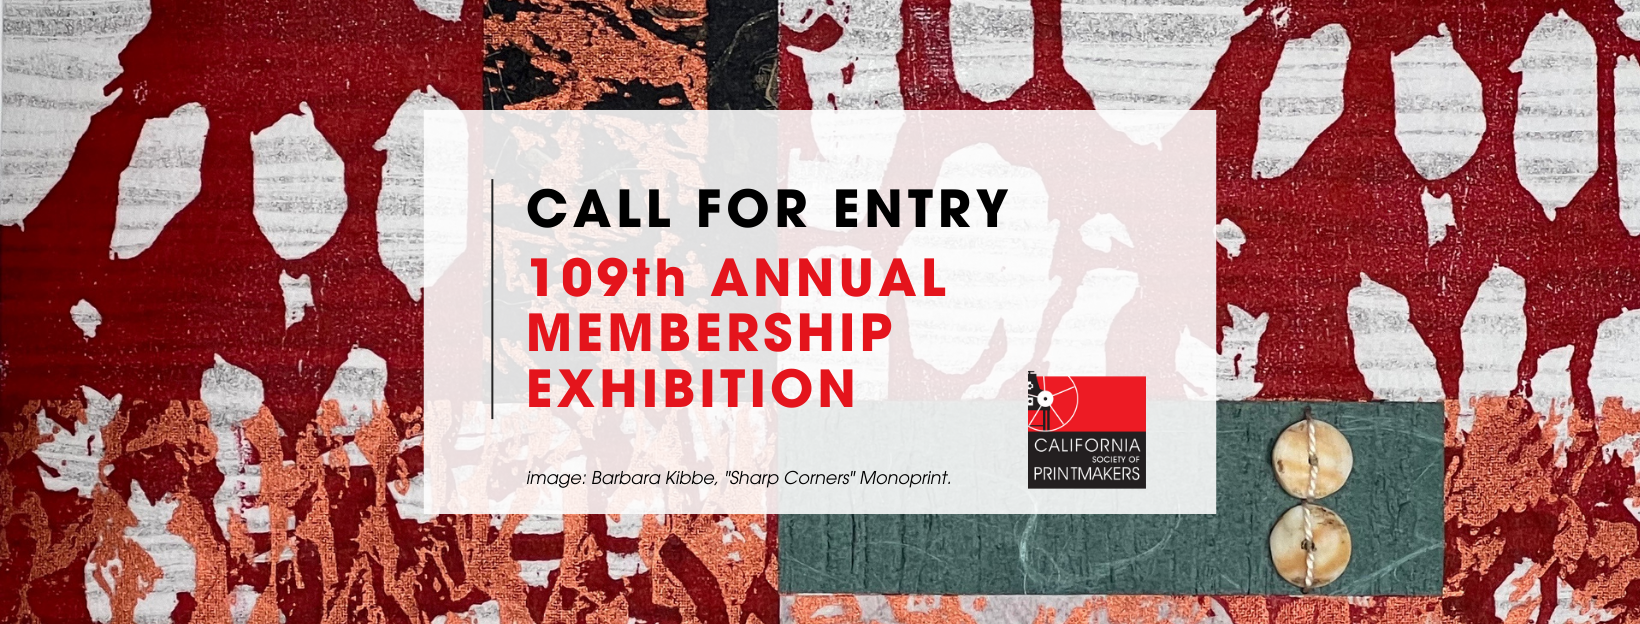 Call for entry. 109th Annual Membership Exhibition